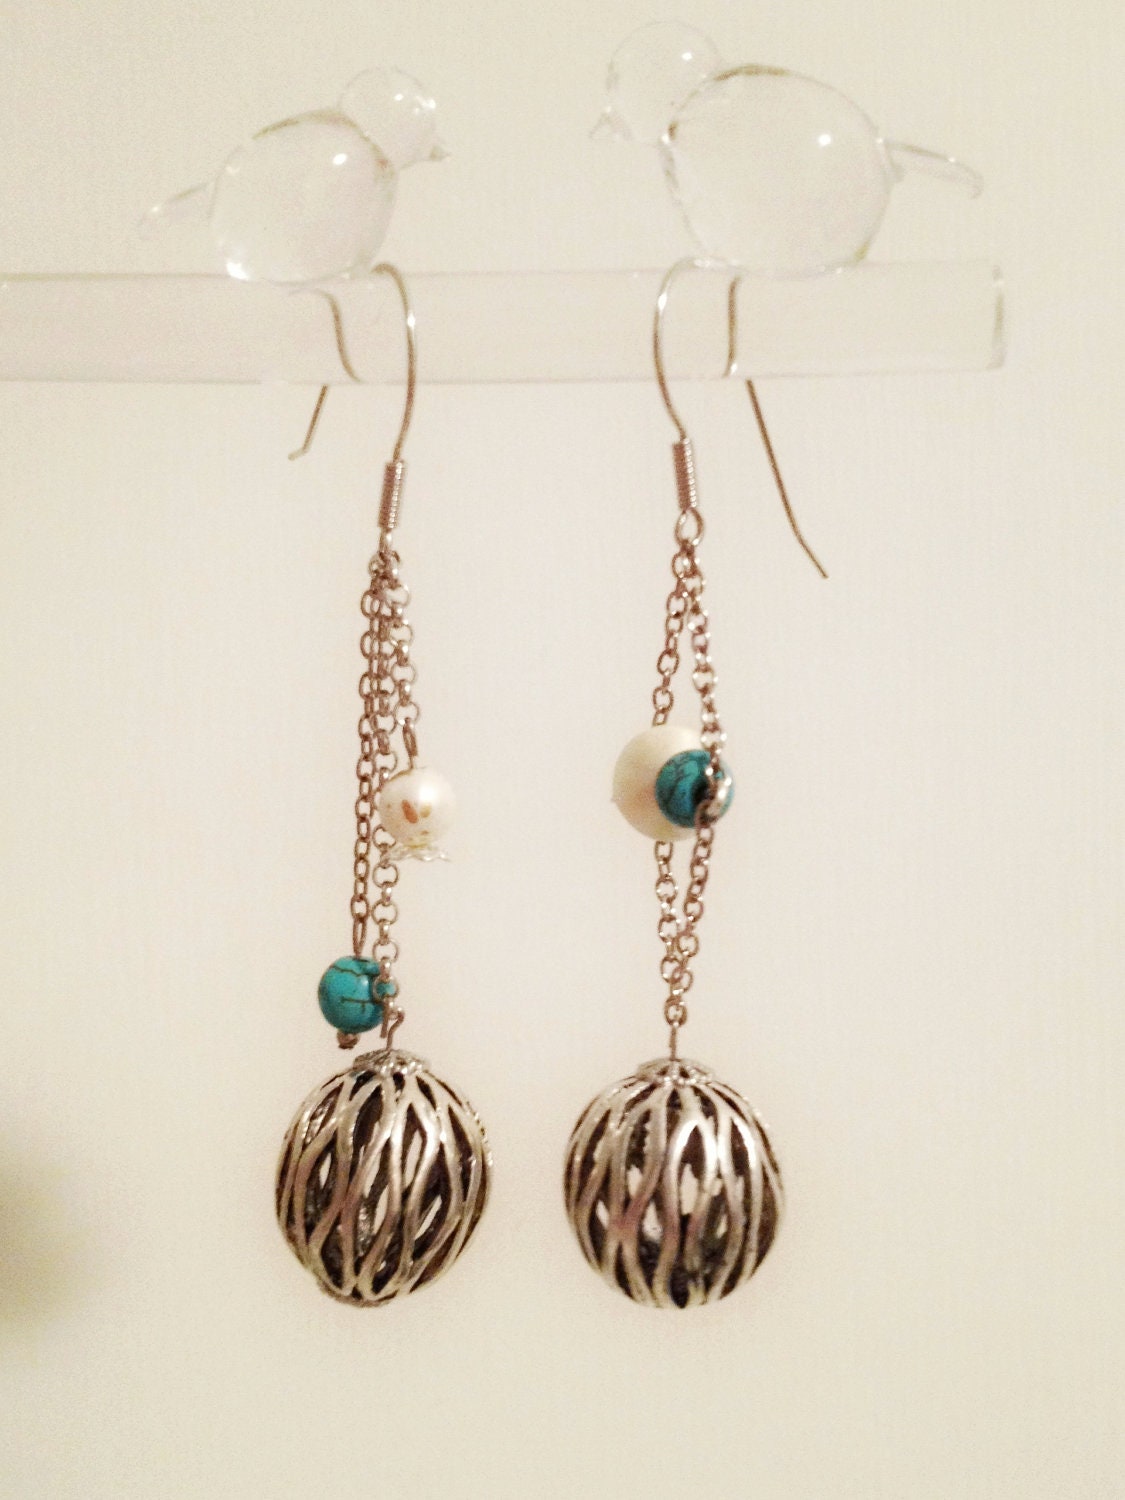 Bohemian Dangle Earrings, with Turquoise Stones and Pearly Beads, Asymmetrical Earrings, 925 silver earrings